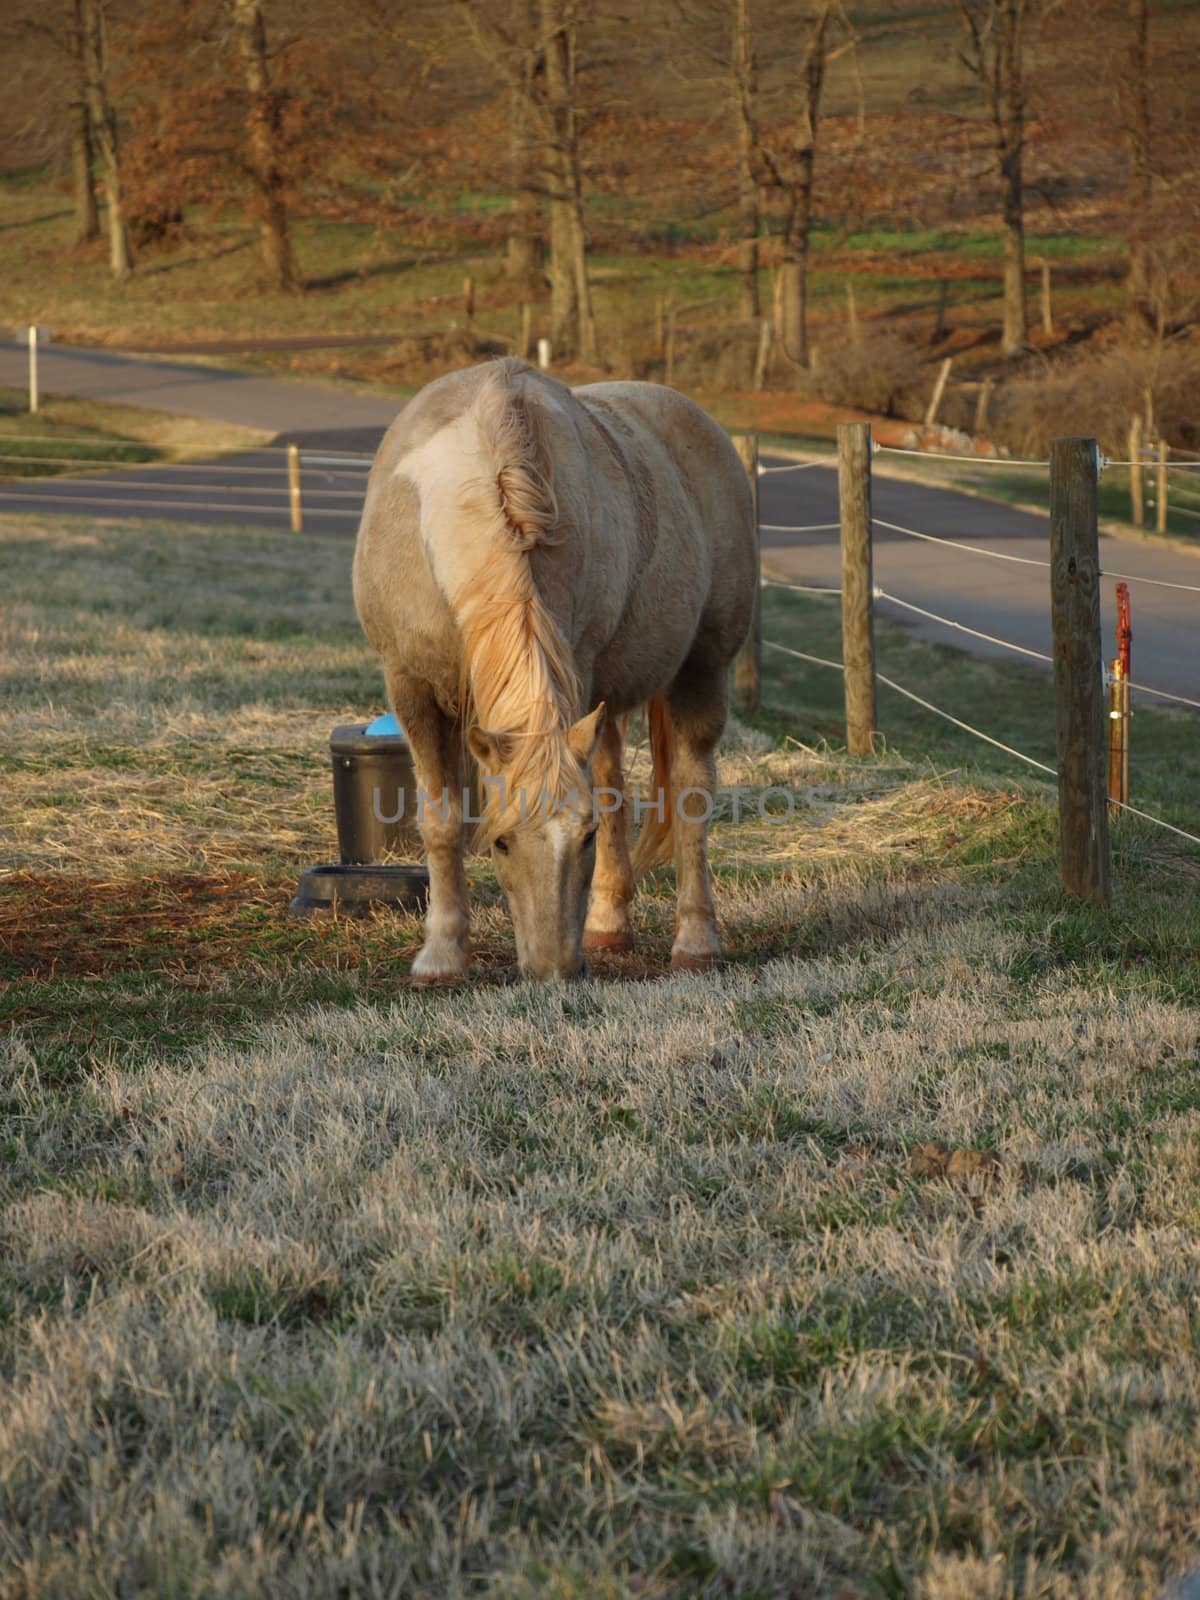 A large white horse eating grass